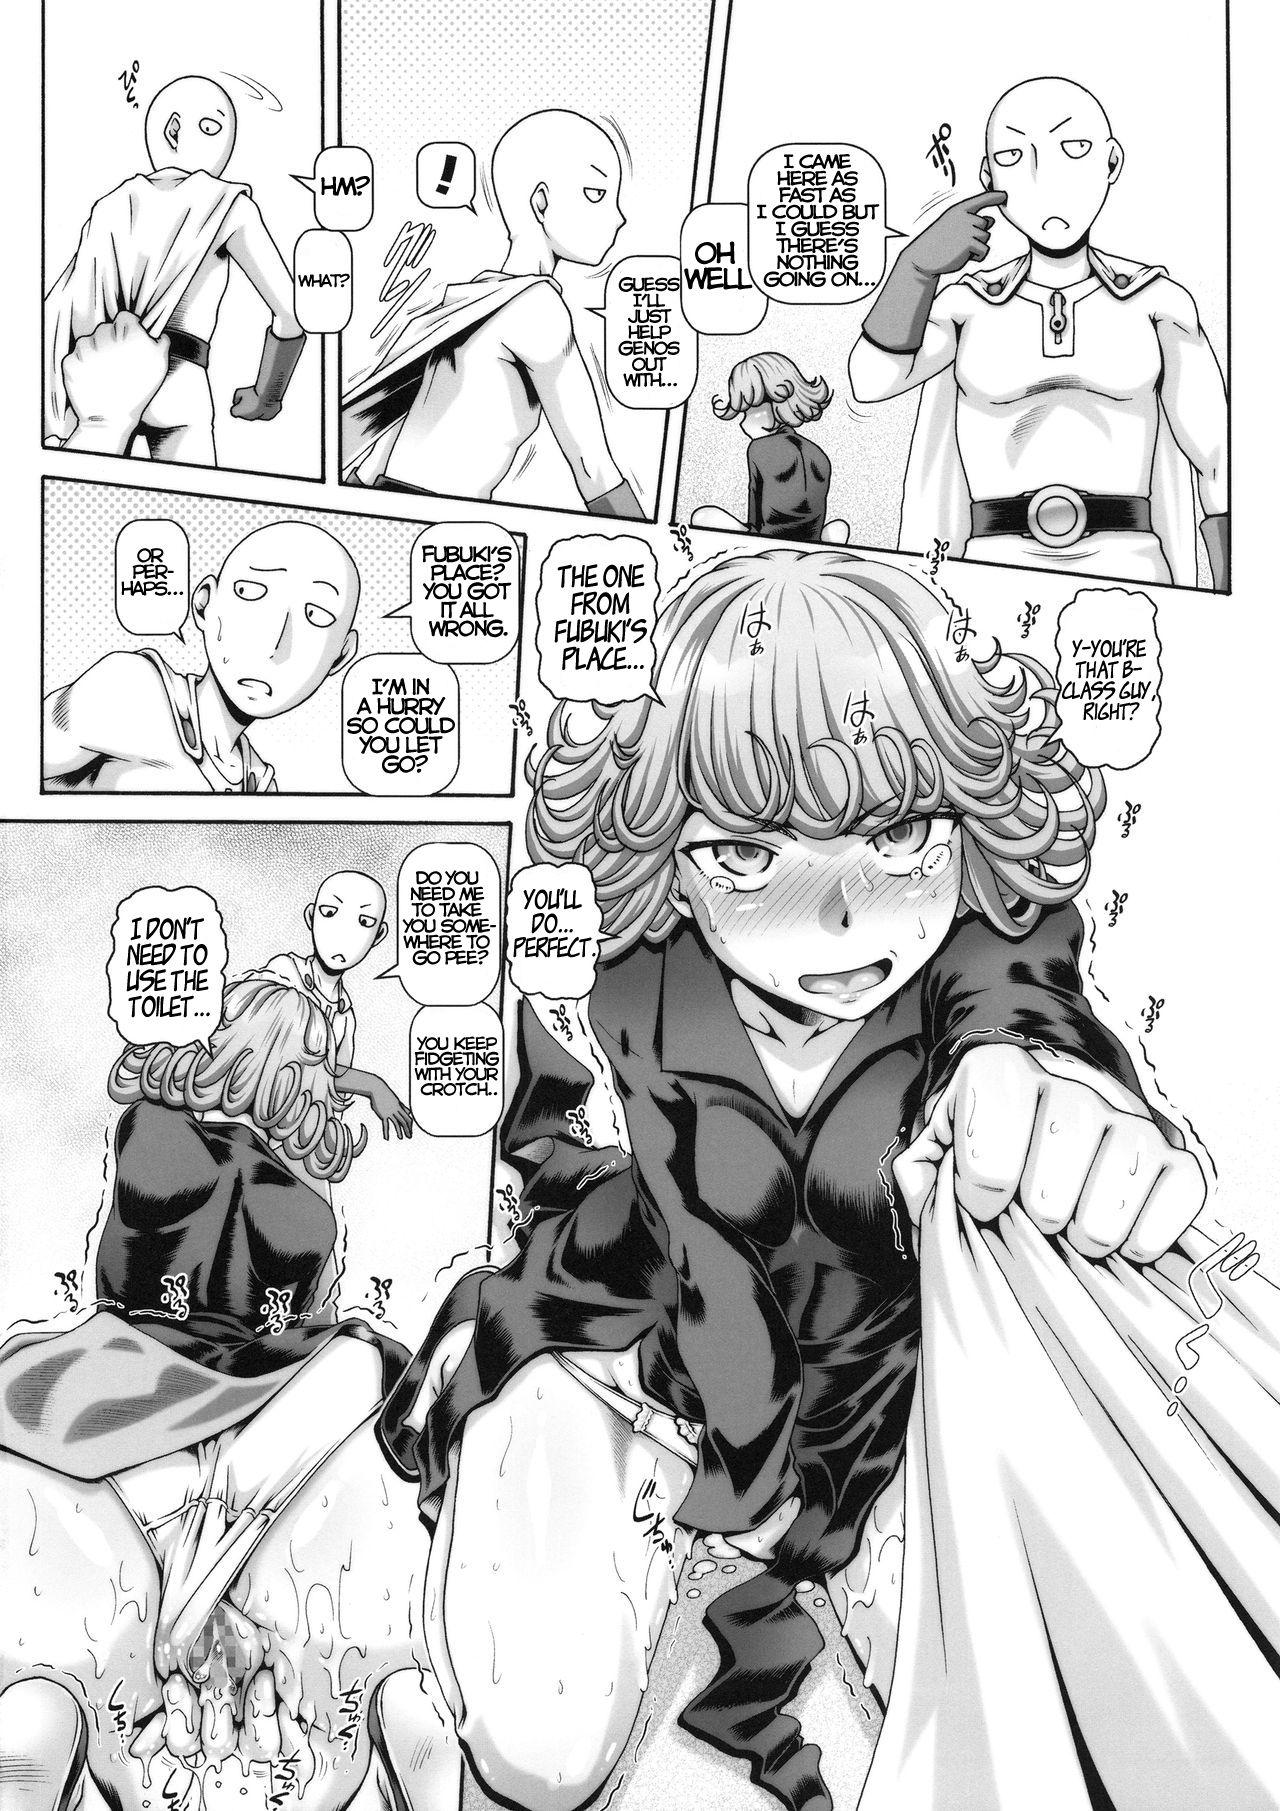 Gayhardcore EMPIRE HARD CORE 2019 SUMMER - One punch man Tits - Page 5